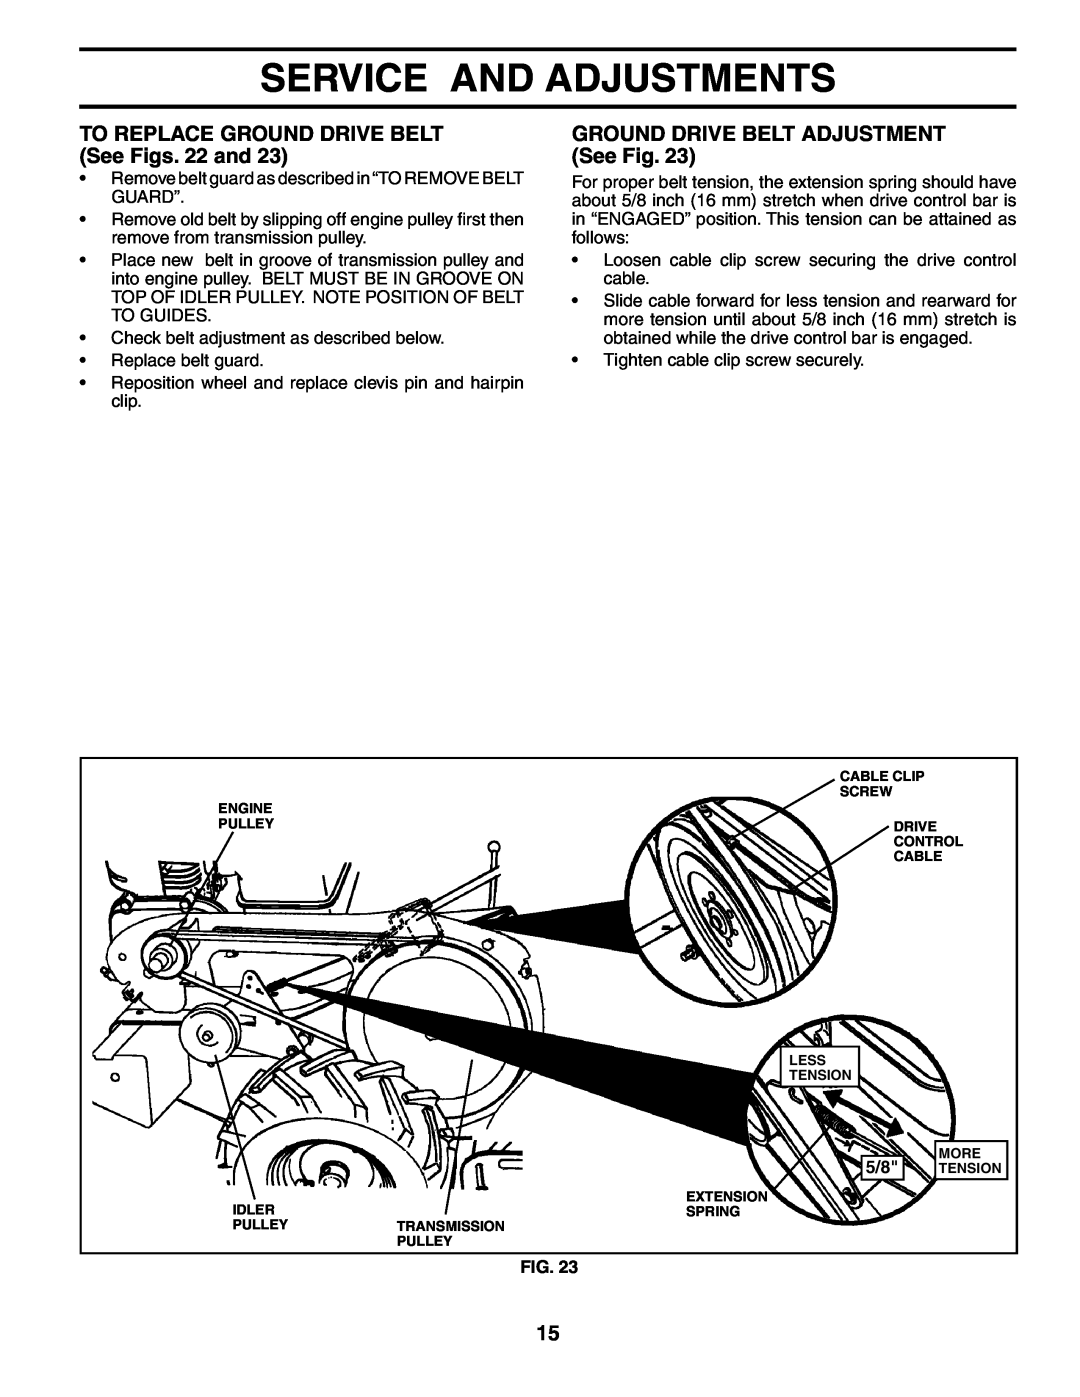 Poulan 184865 TO REPLACE GROUND DRIVE BELT See Figs. 22 and, GROUND DRIVE BELT ADJUSTMENT See Fig, Service And Adjustments 